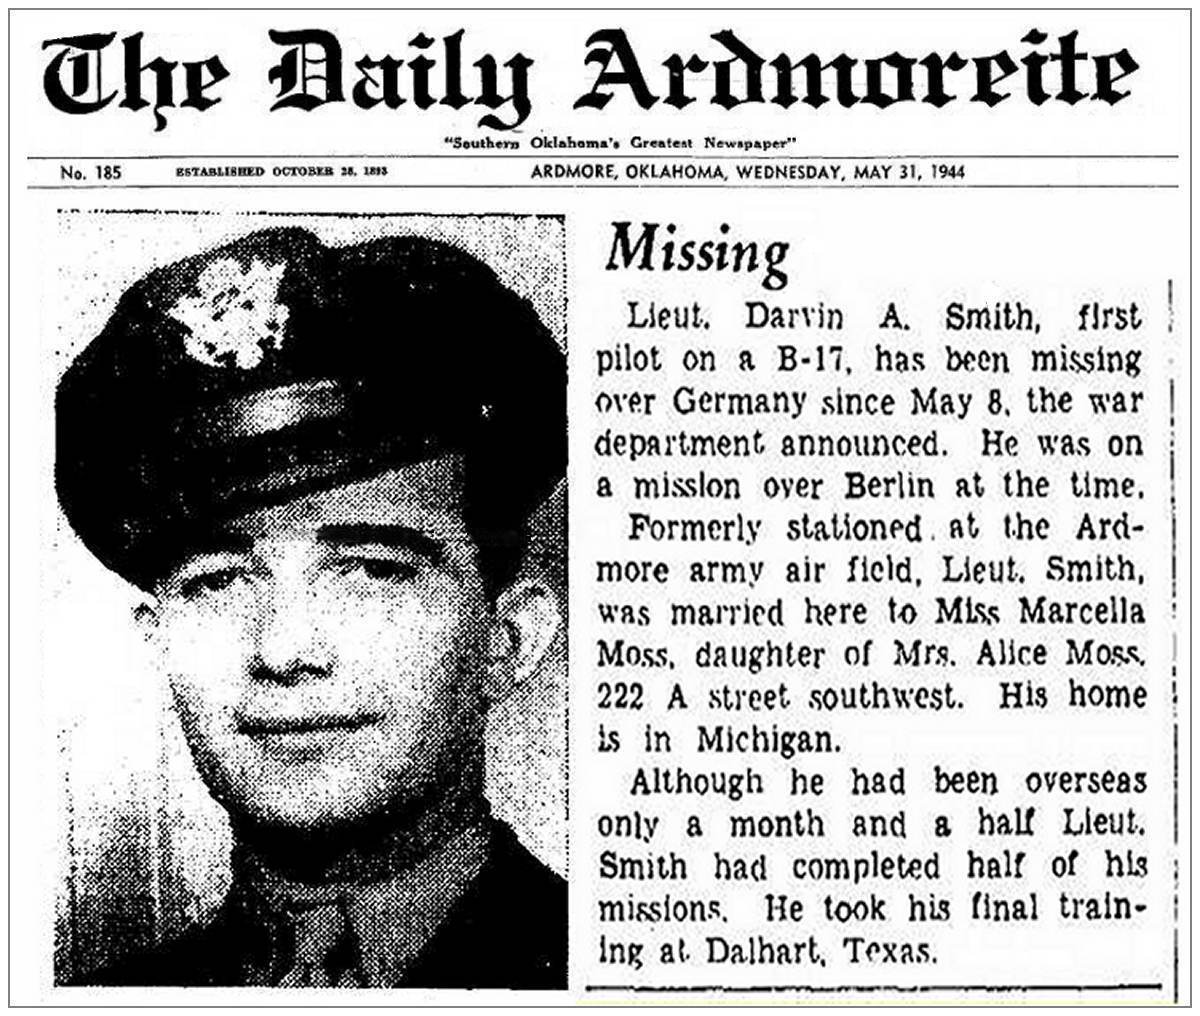 MISSING - Lt. Darvin A. Smith - The Daily Ardmoreite, OK - 31 May 1944